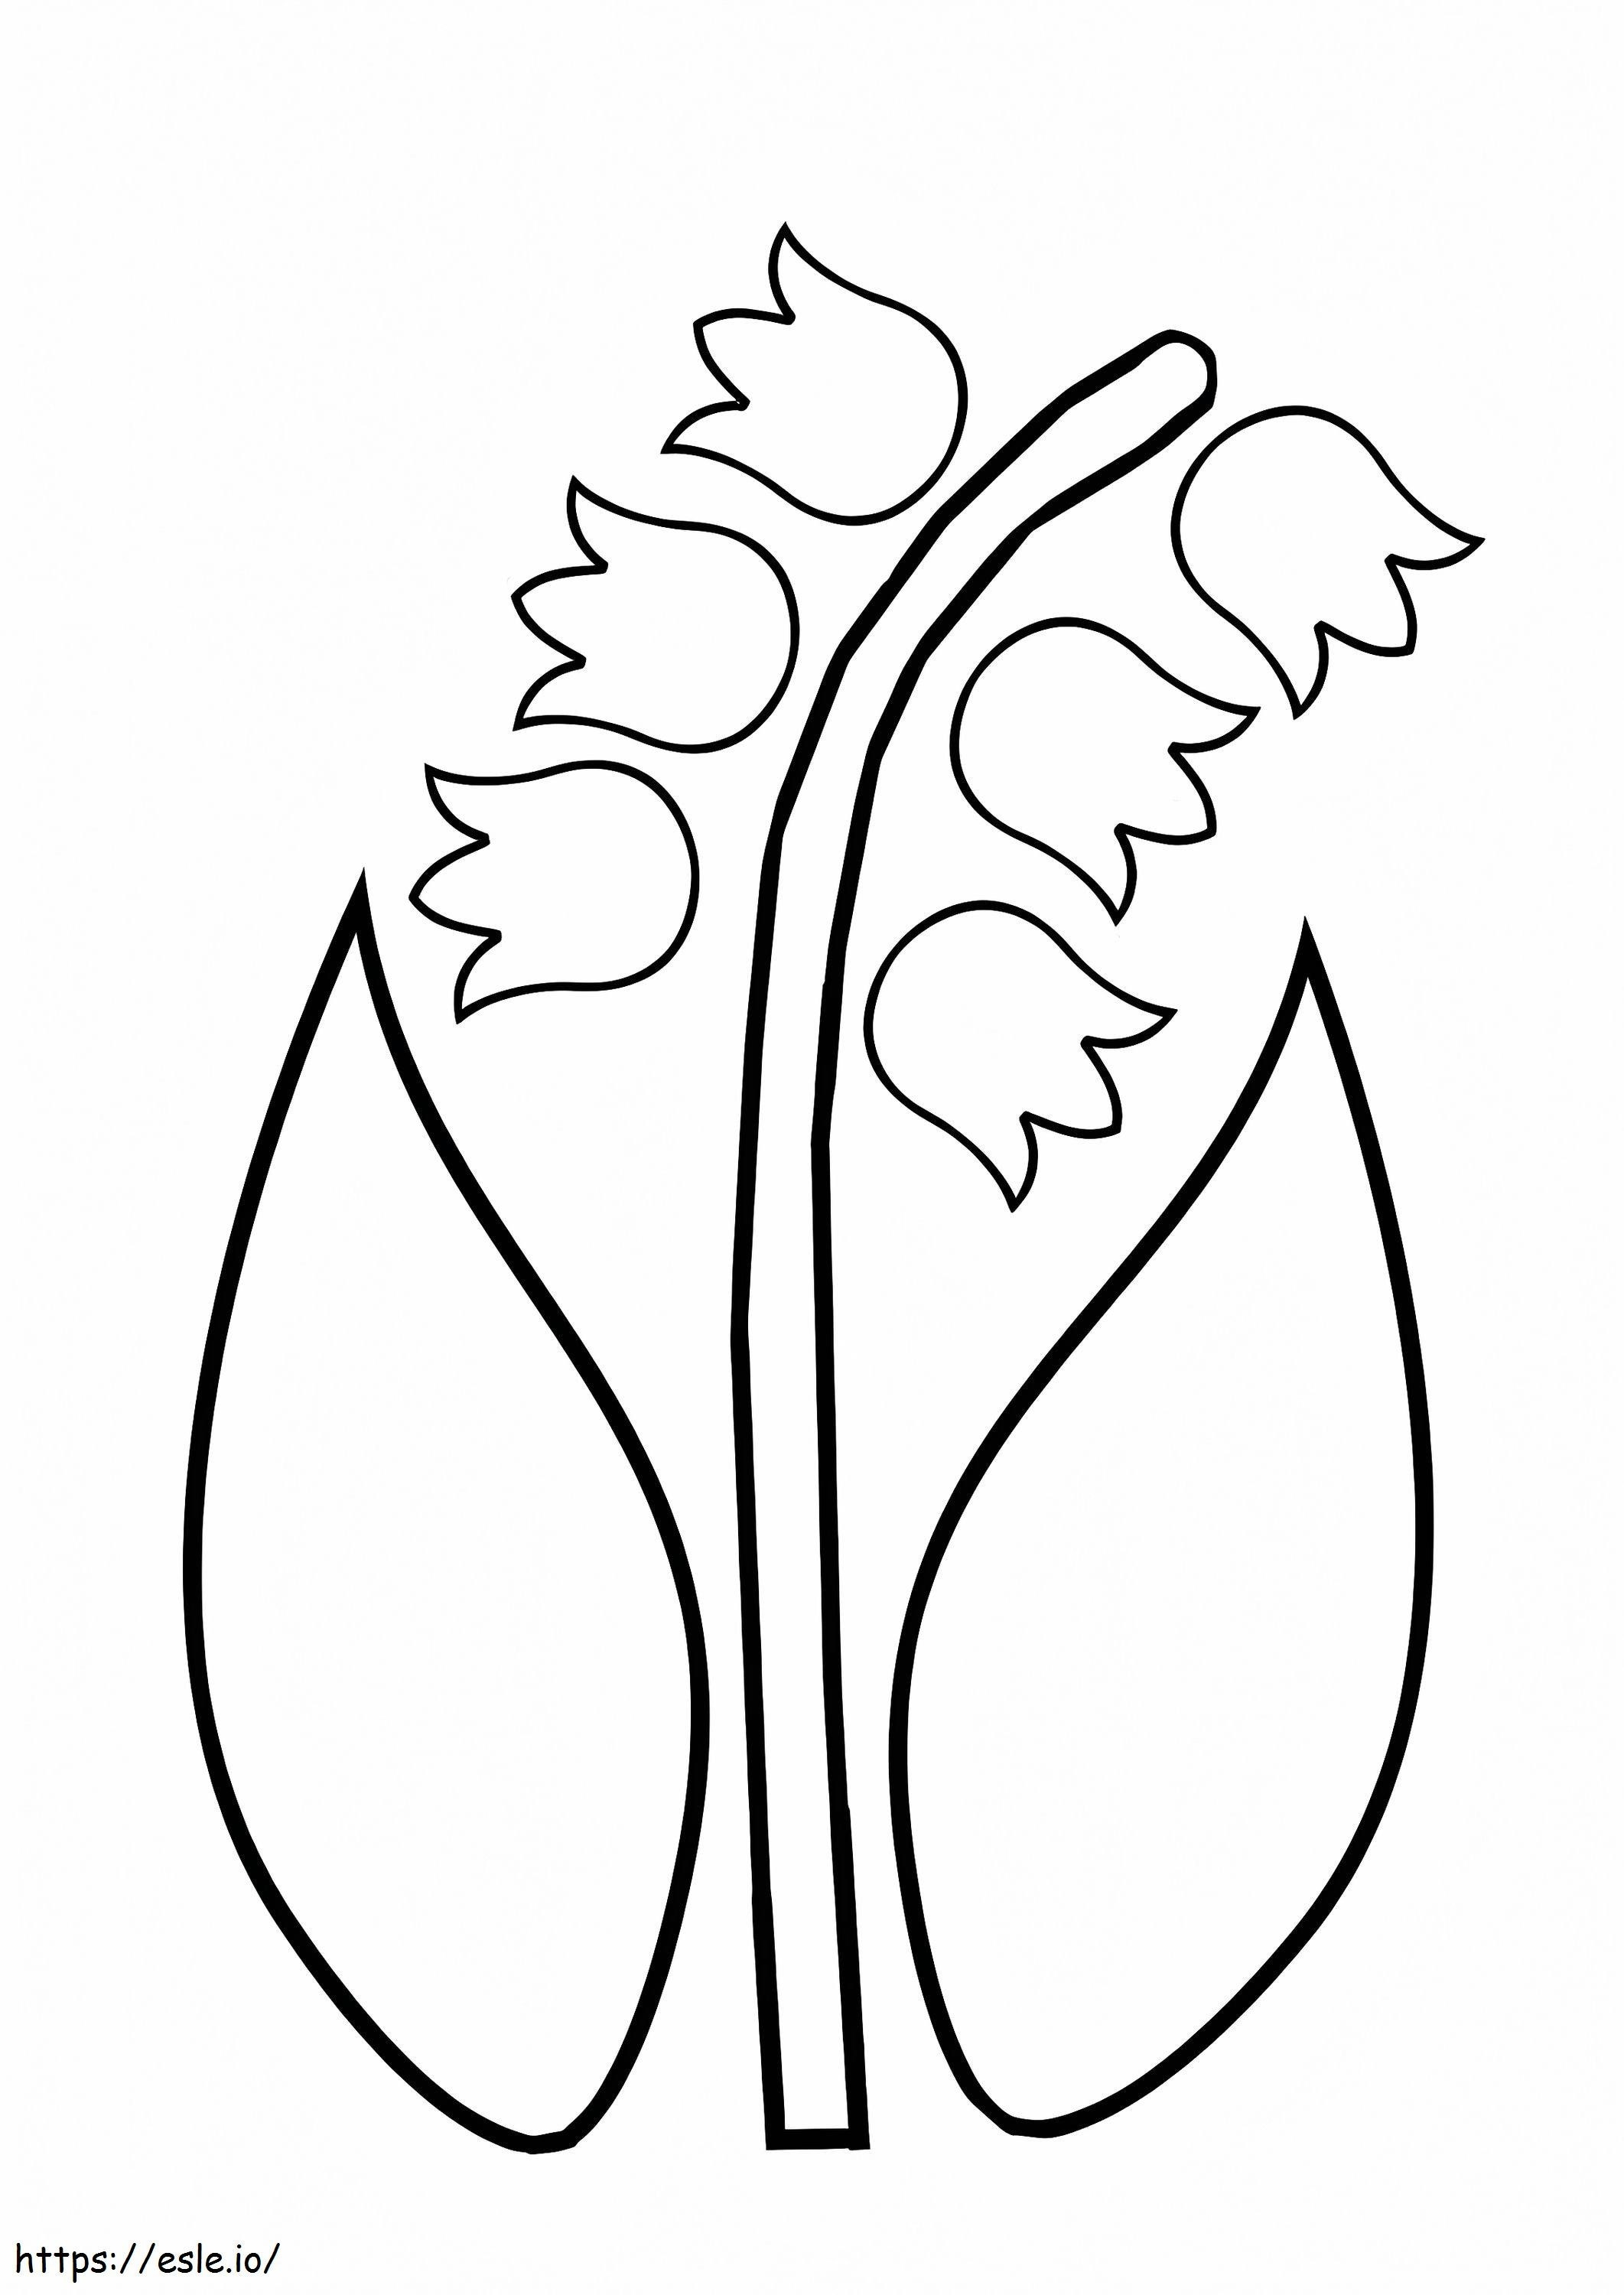 Easy Thrush coloring page